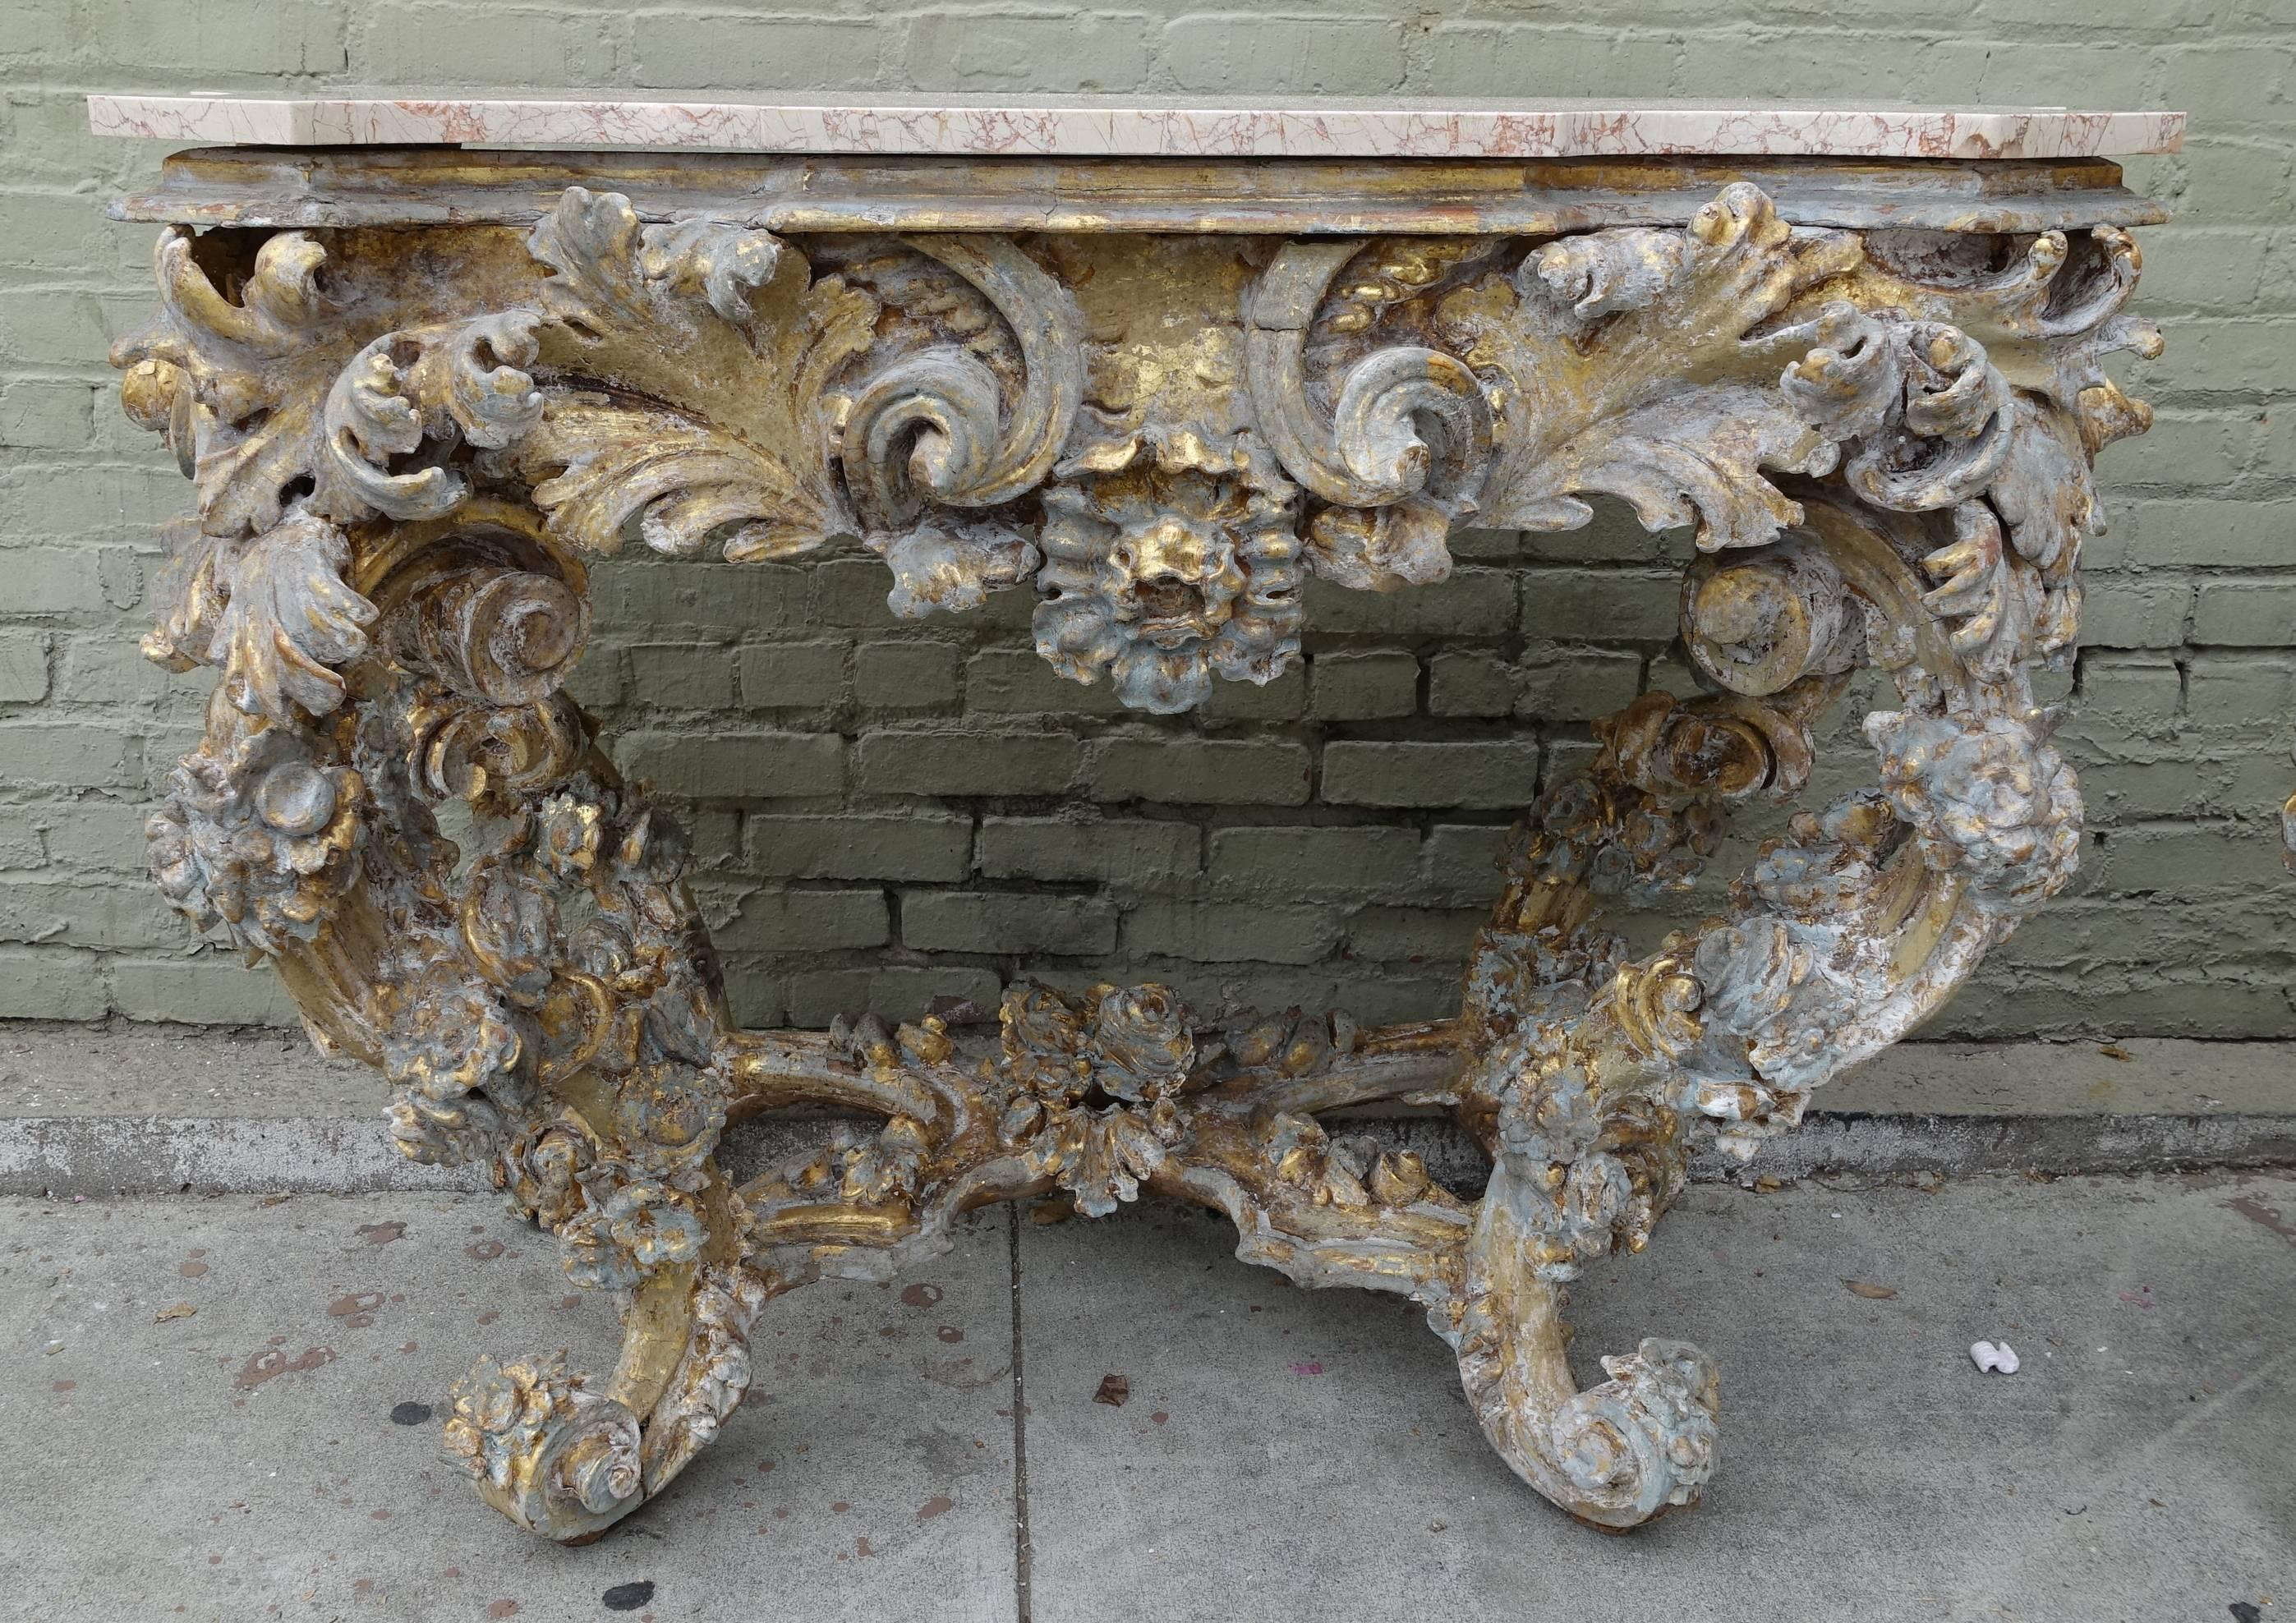 Pair of 19th century French Rococo style painted and giltwood consoles with cream rose serpentine shaped marble tops. The dramatic intricate carving on the consoles depicts scrolls, acanthus leaves and foliage throughout. Bottom 